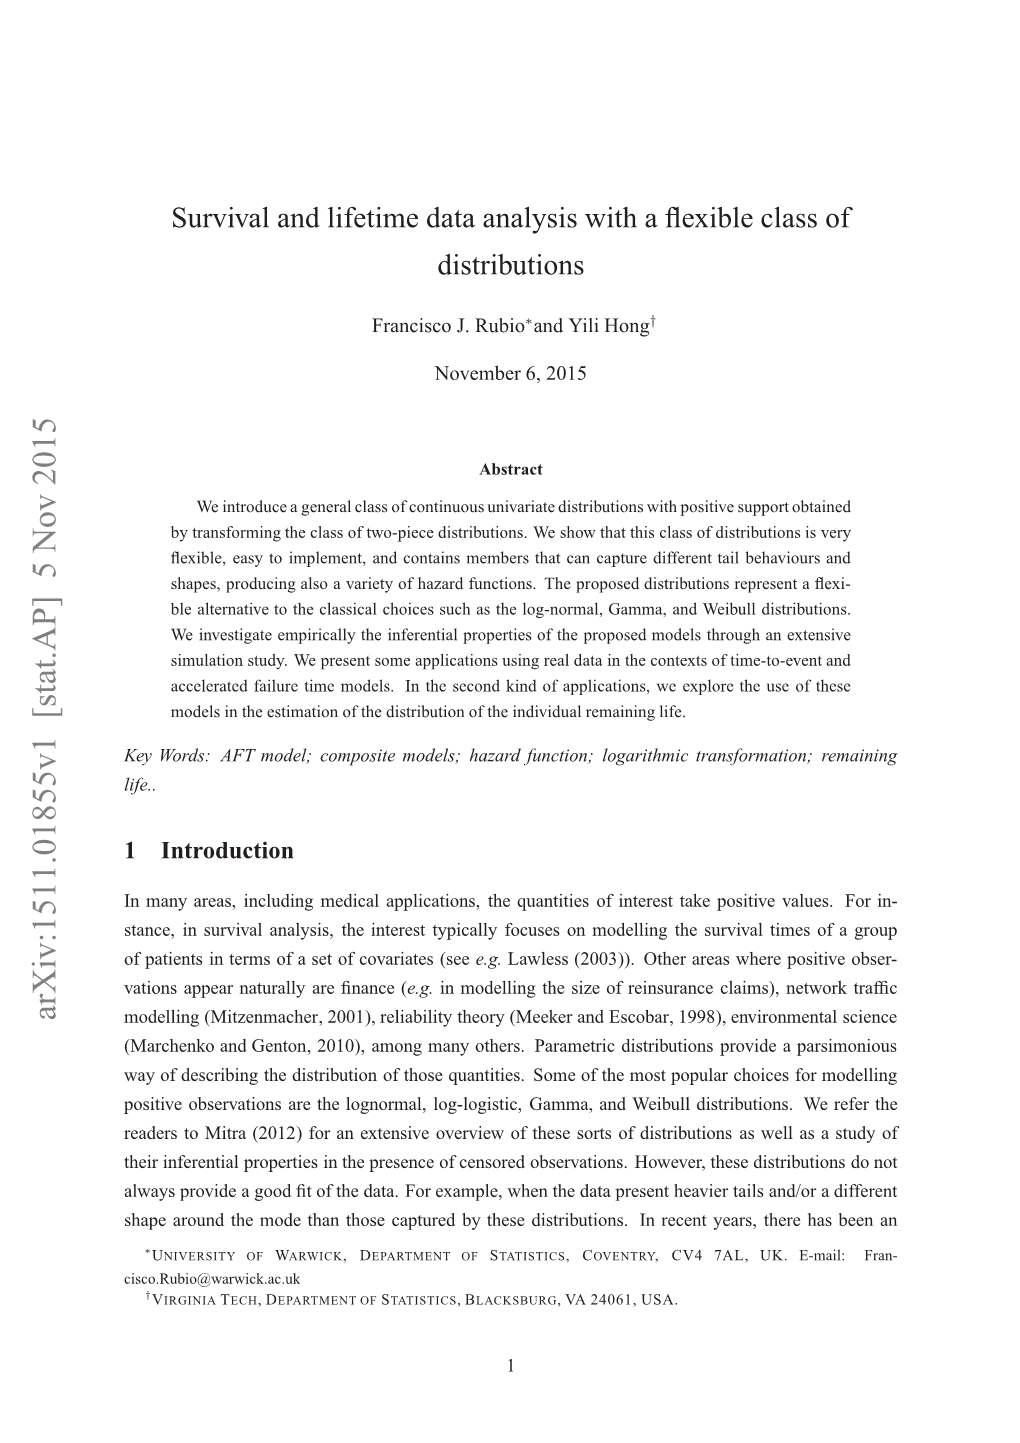 Survival and Lifetime Data Analysis with a Flexible Class of Distributions